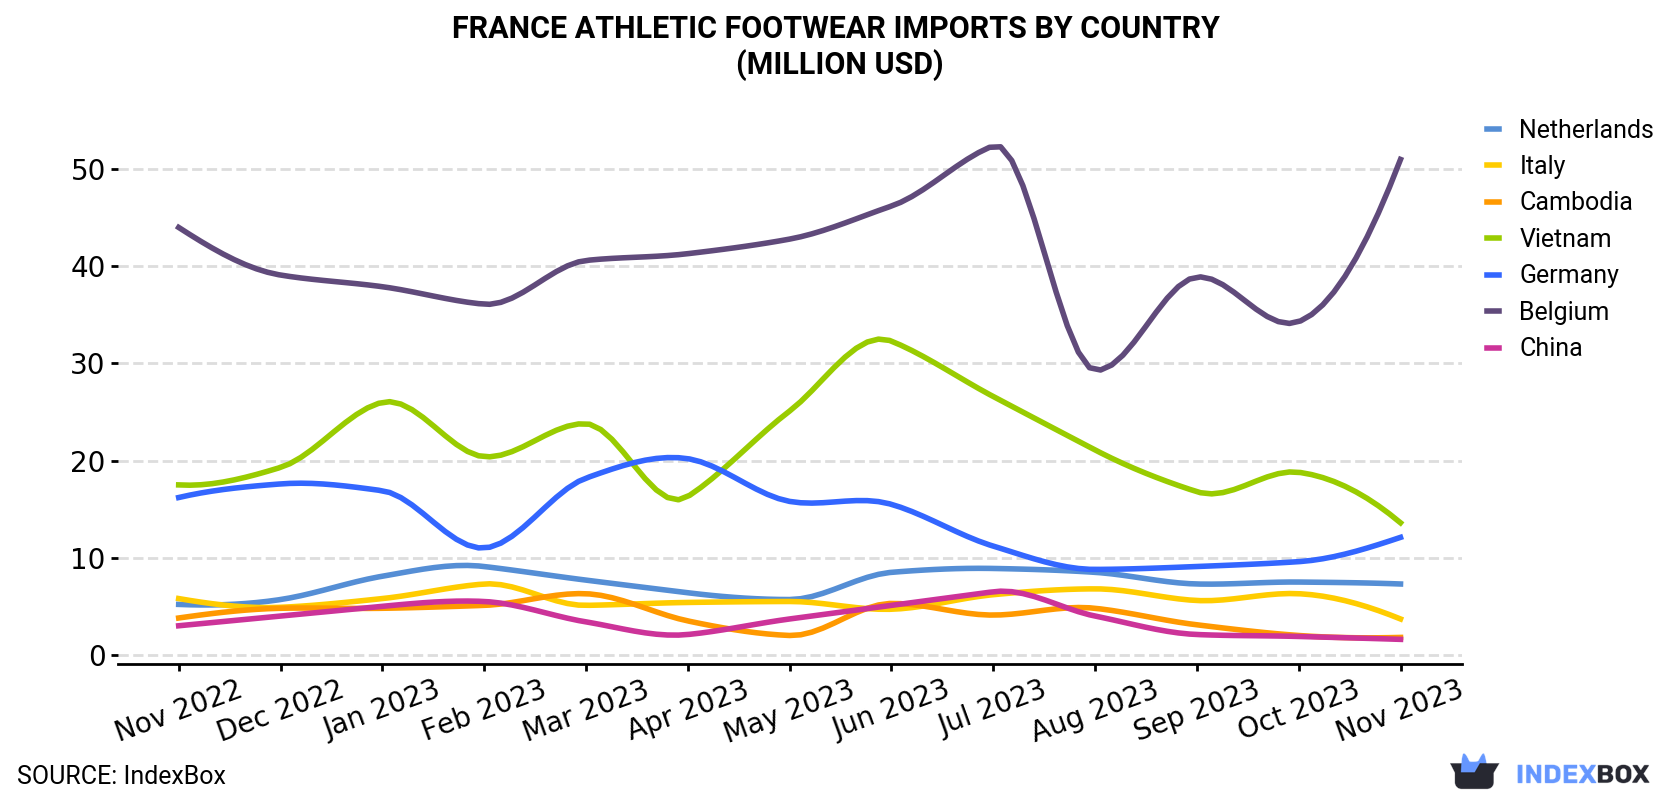 France Athletic Footwear Imports By Country (Million USD)